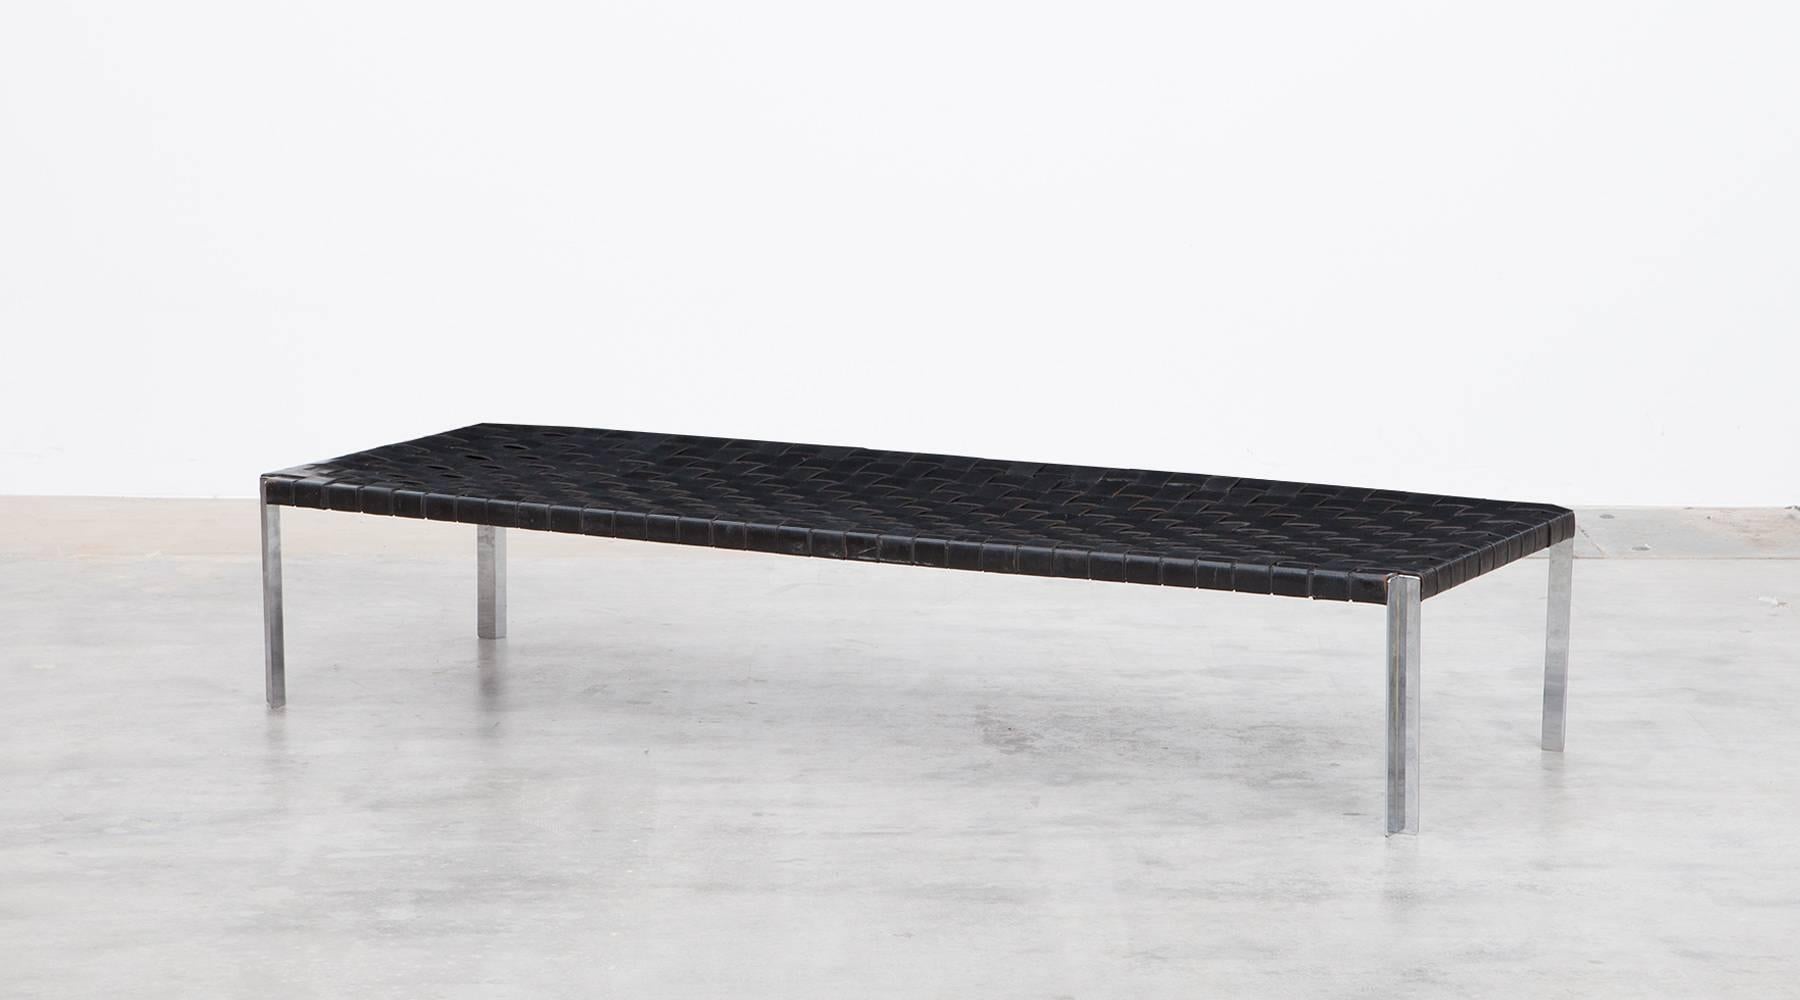 Magnificent bench with woven leather belts in black on a matte chromium plated steel base. The confident, clear-shaped bench is an original example from 1955, manufactured by Laverne International. 

The designer couple Erwine and Estelle Laverne,